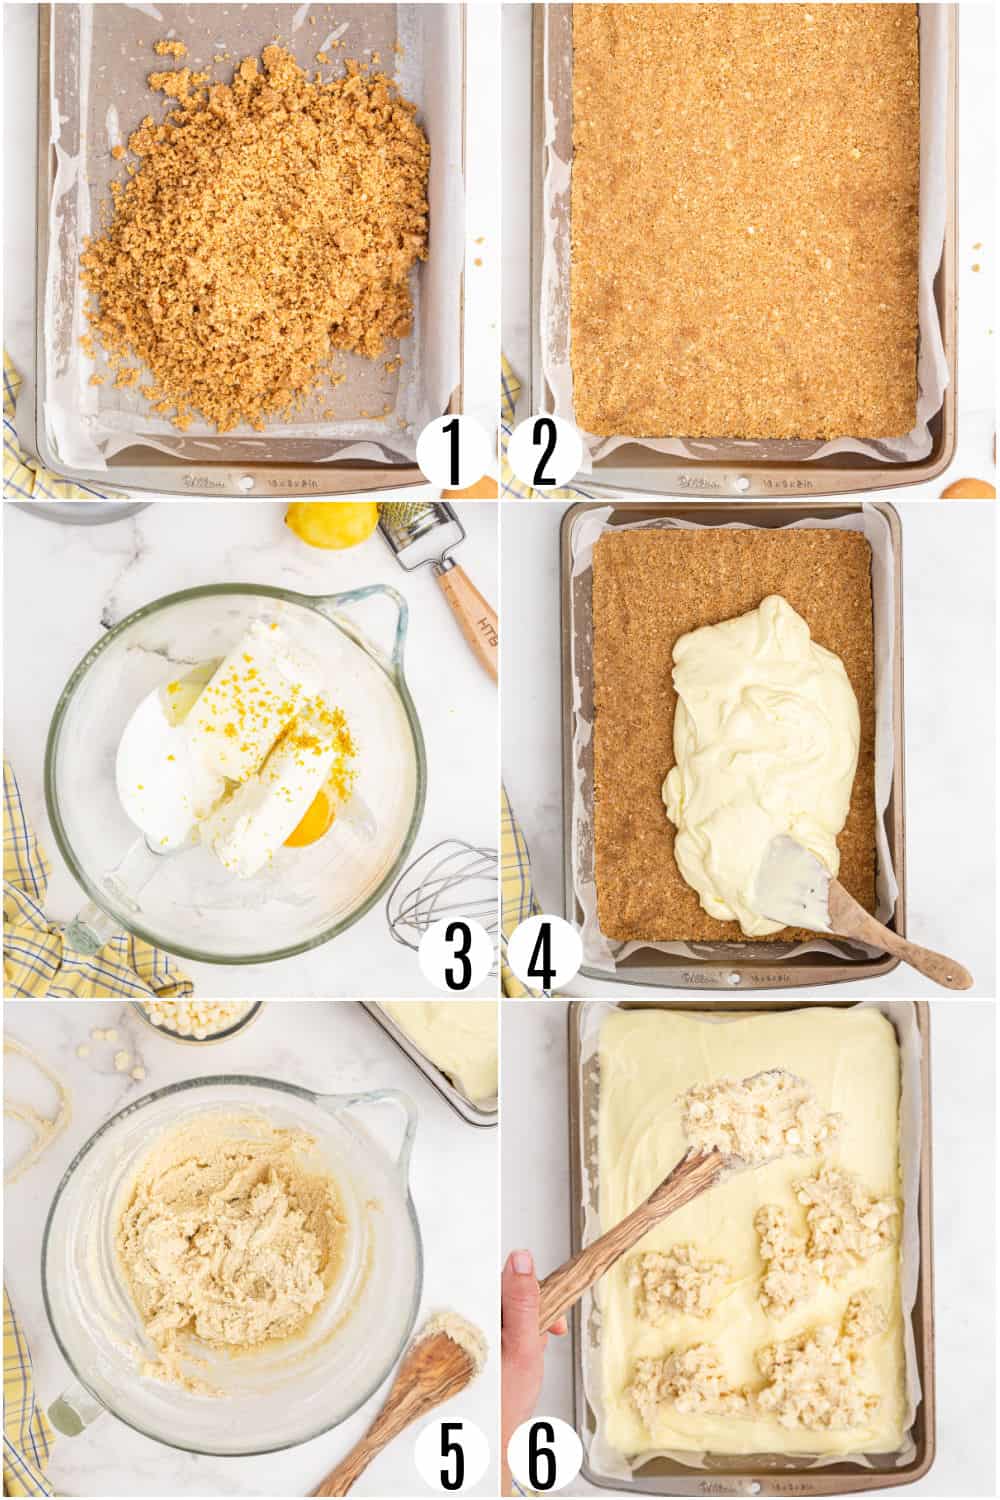 Step by step photos showing how to make lemon cheesecake bars.